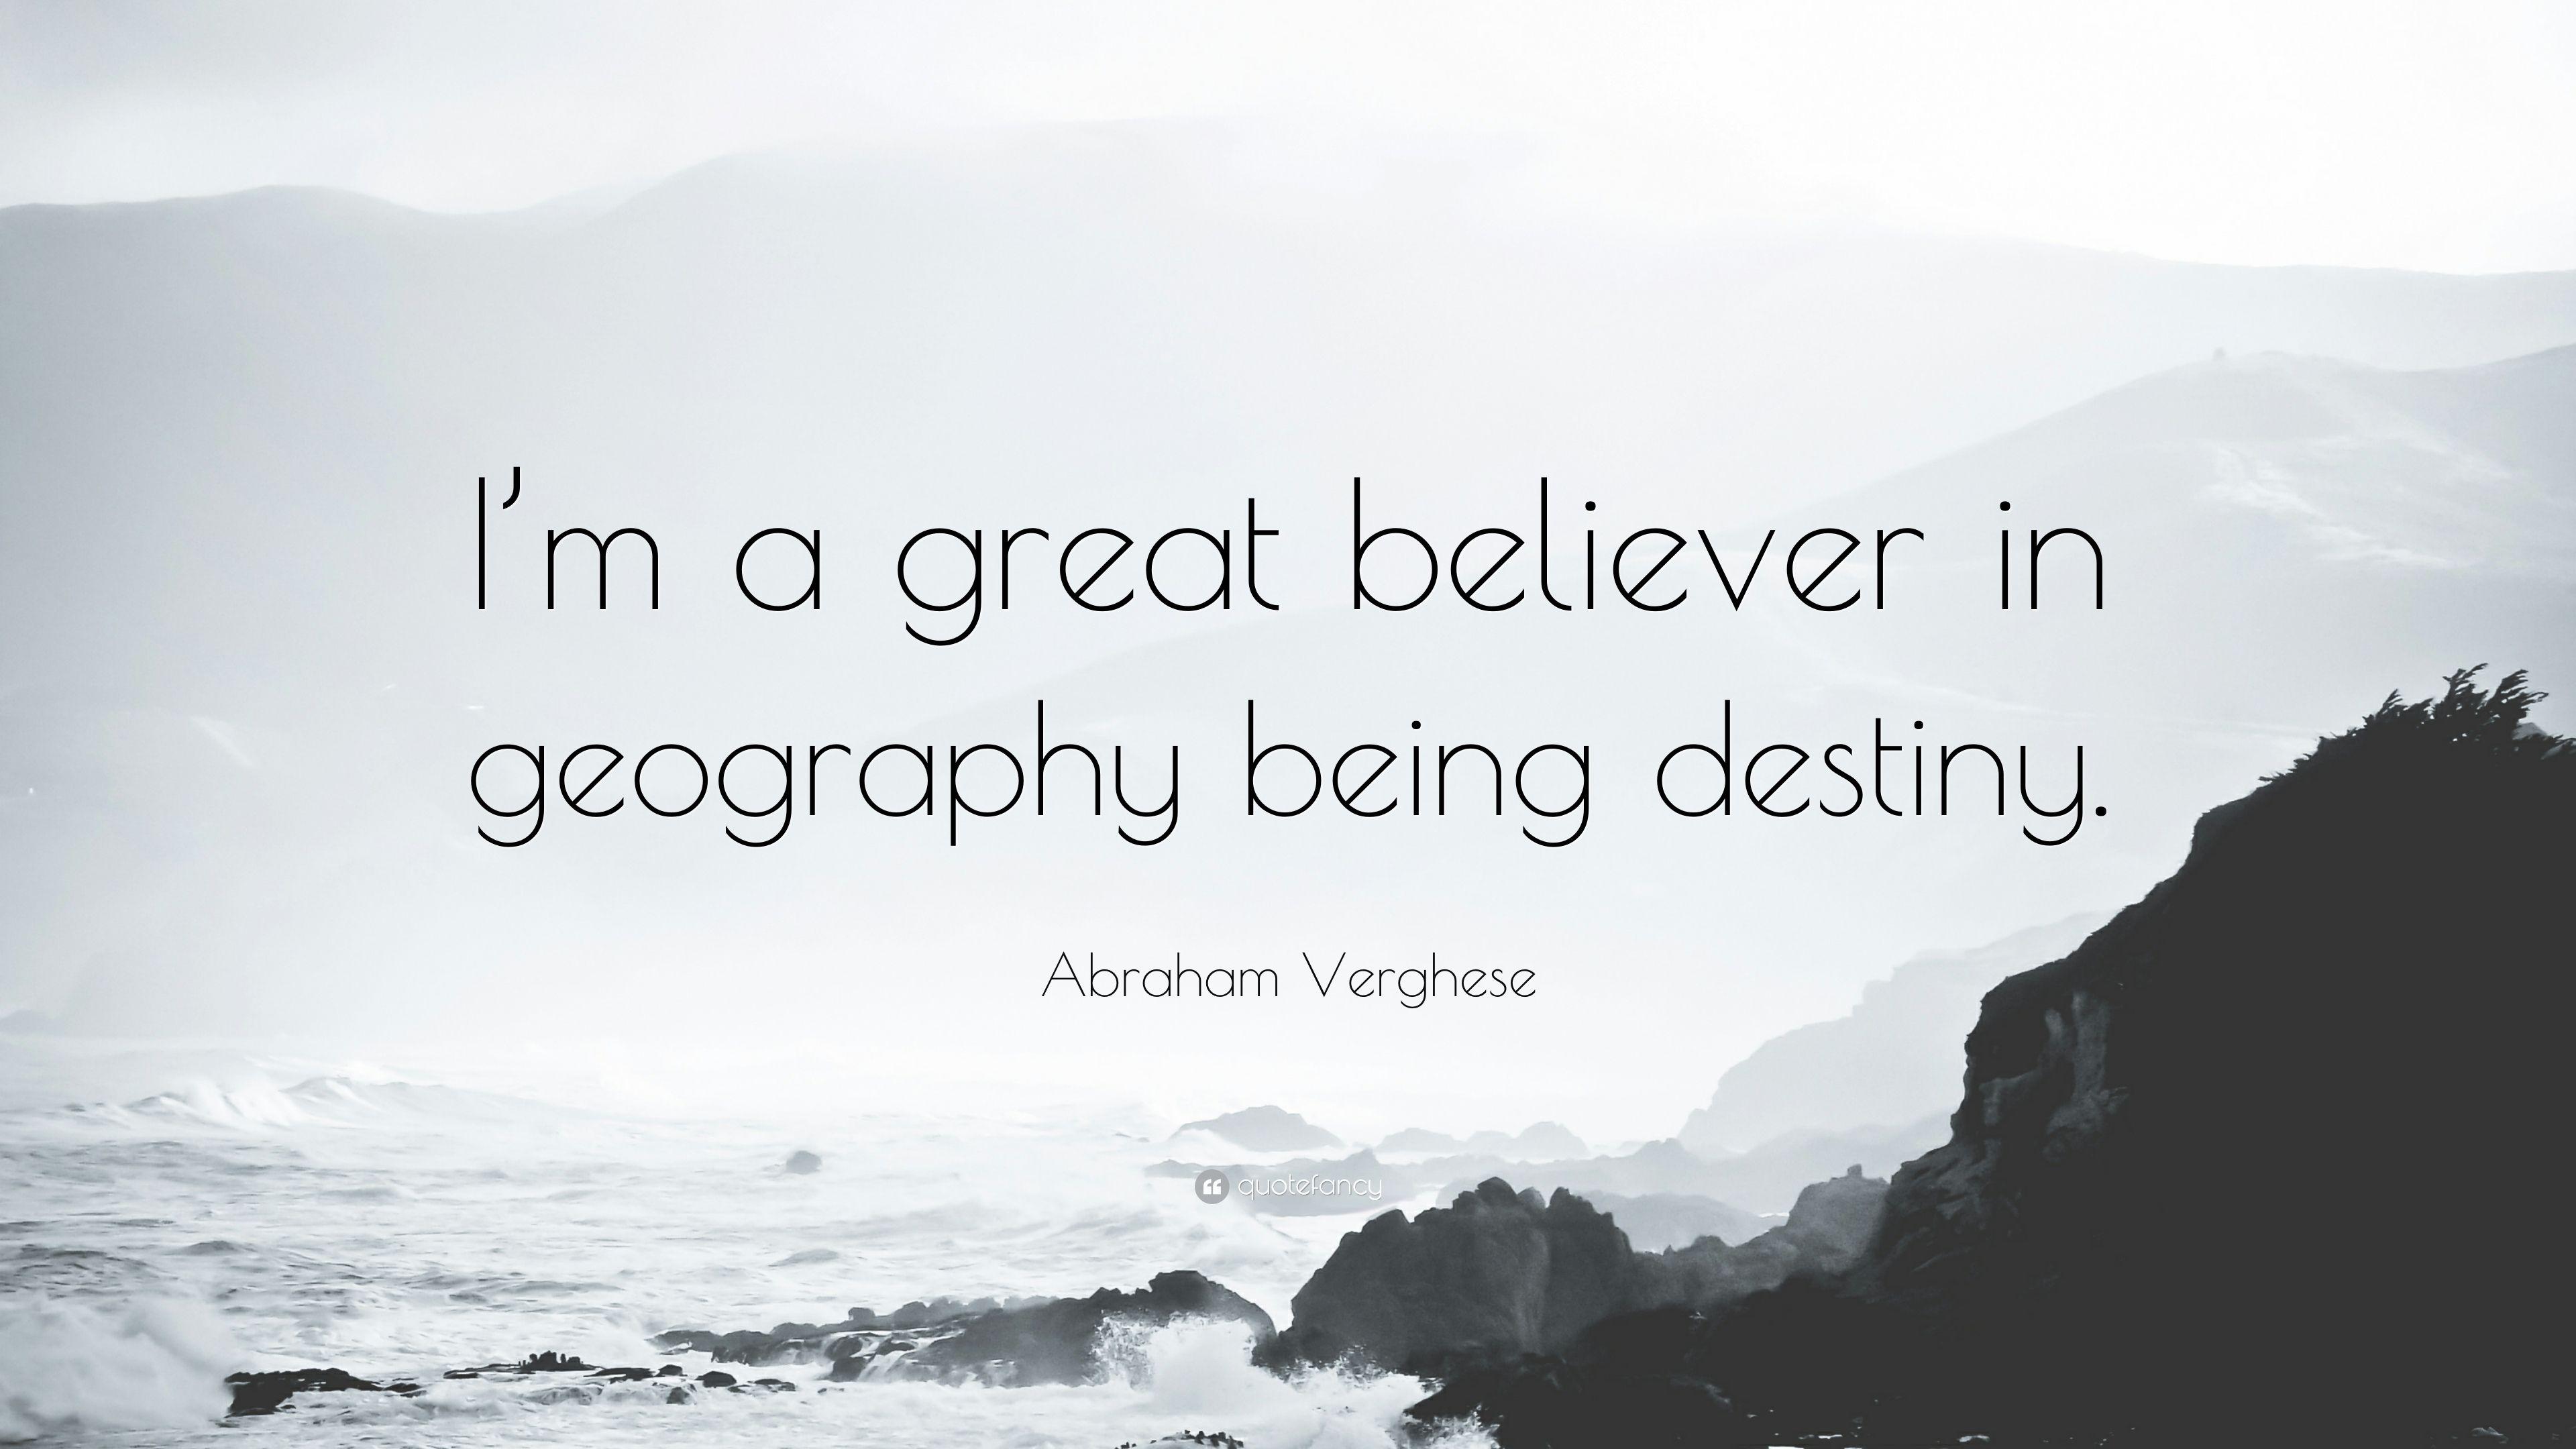 Abraham Verghese Quote: “I'm a great believer in geography being